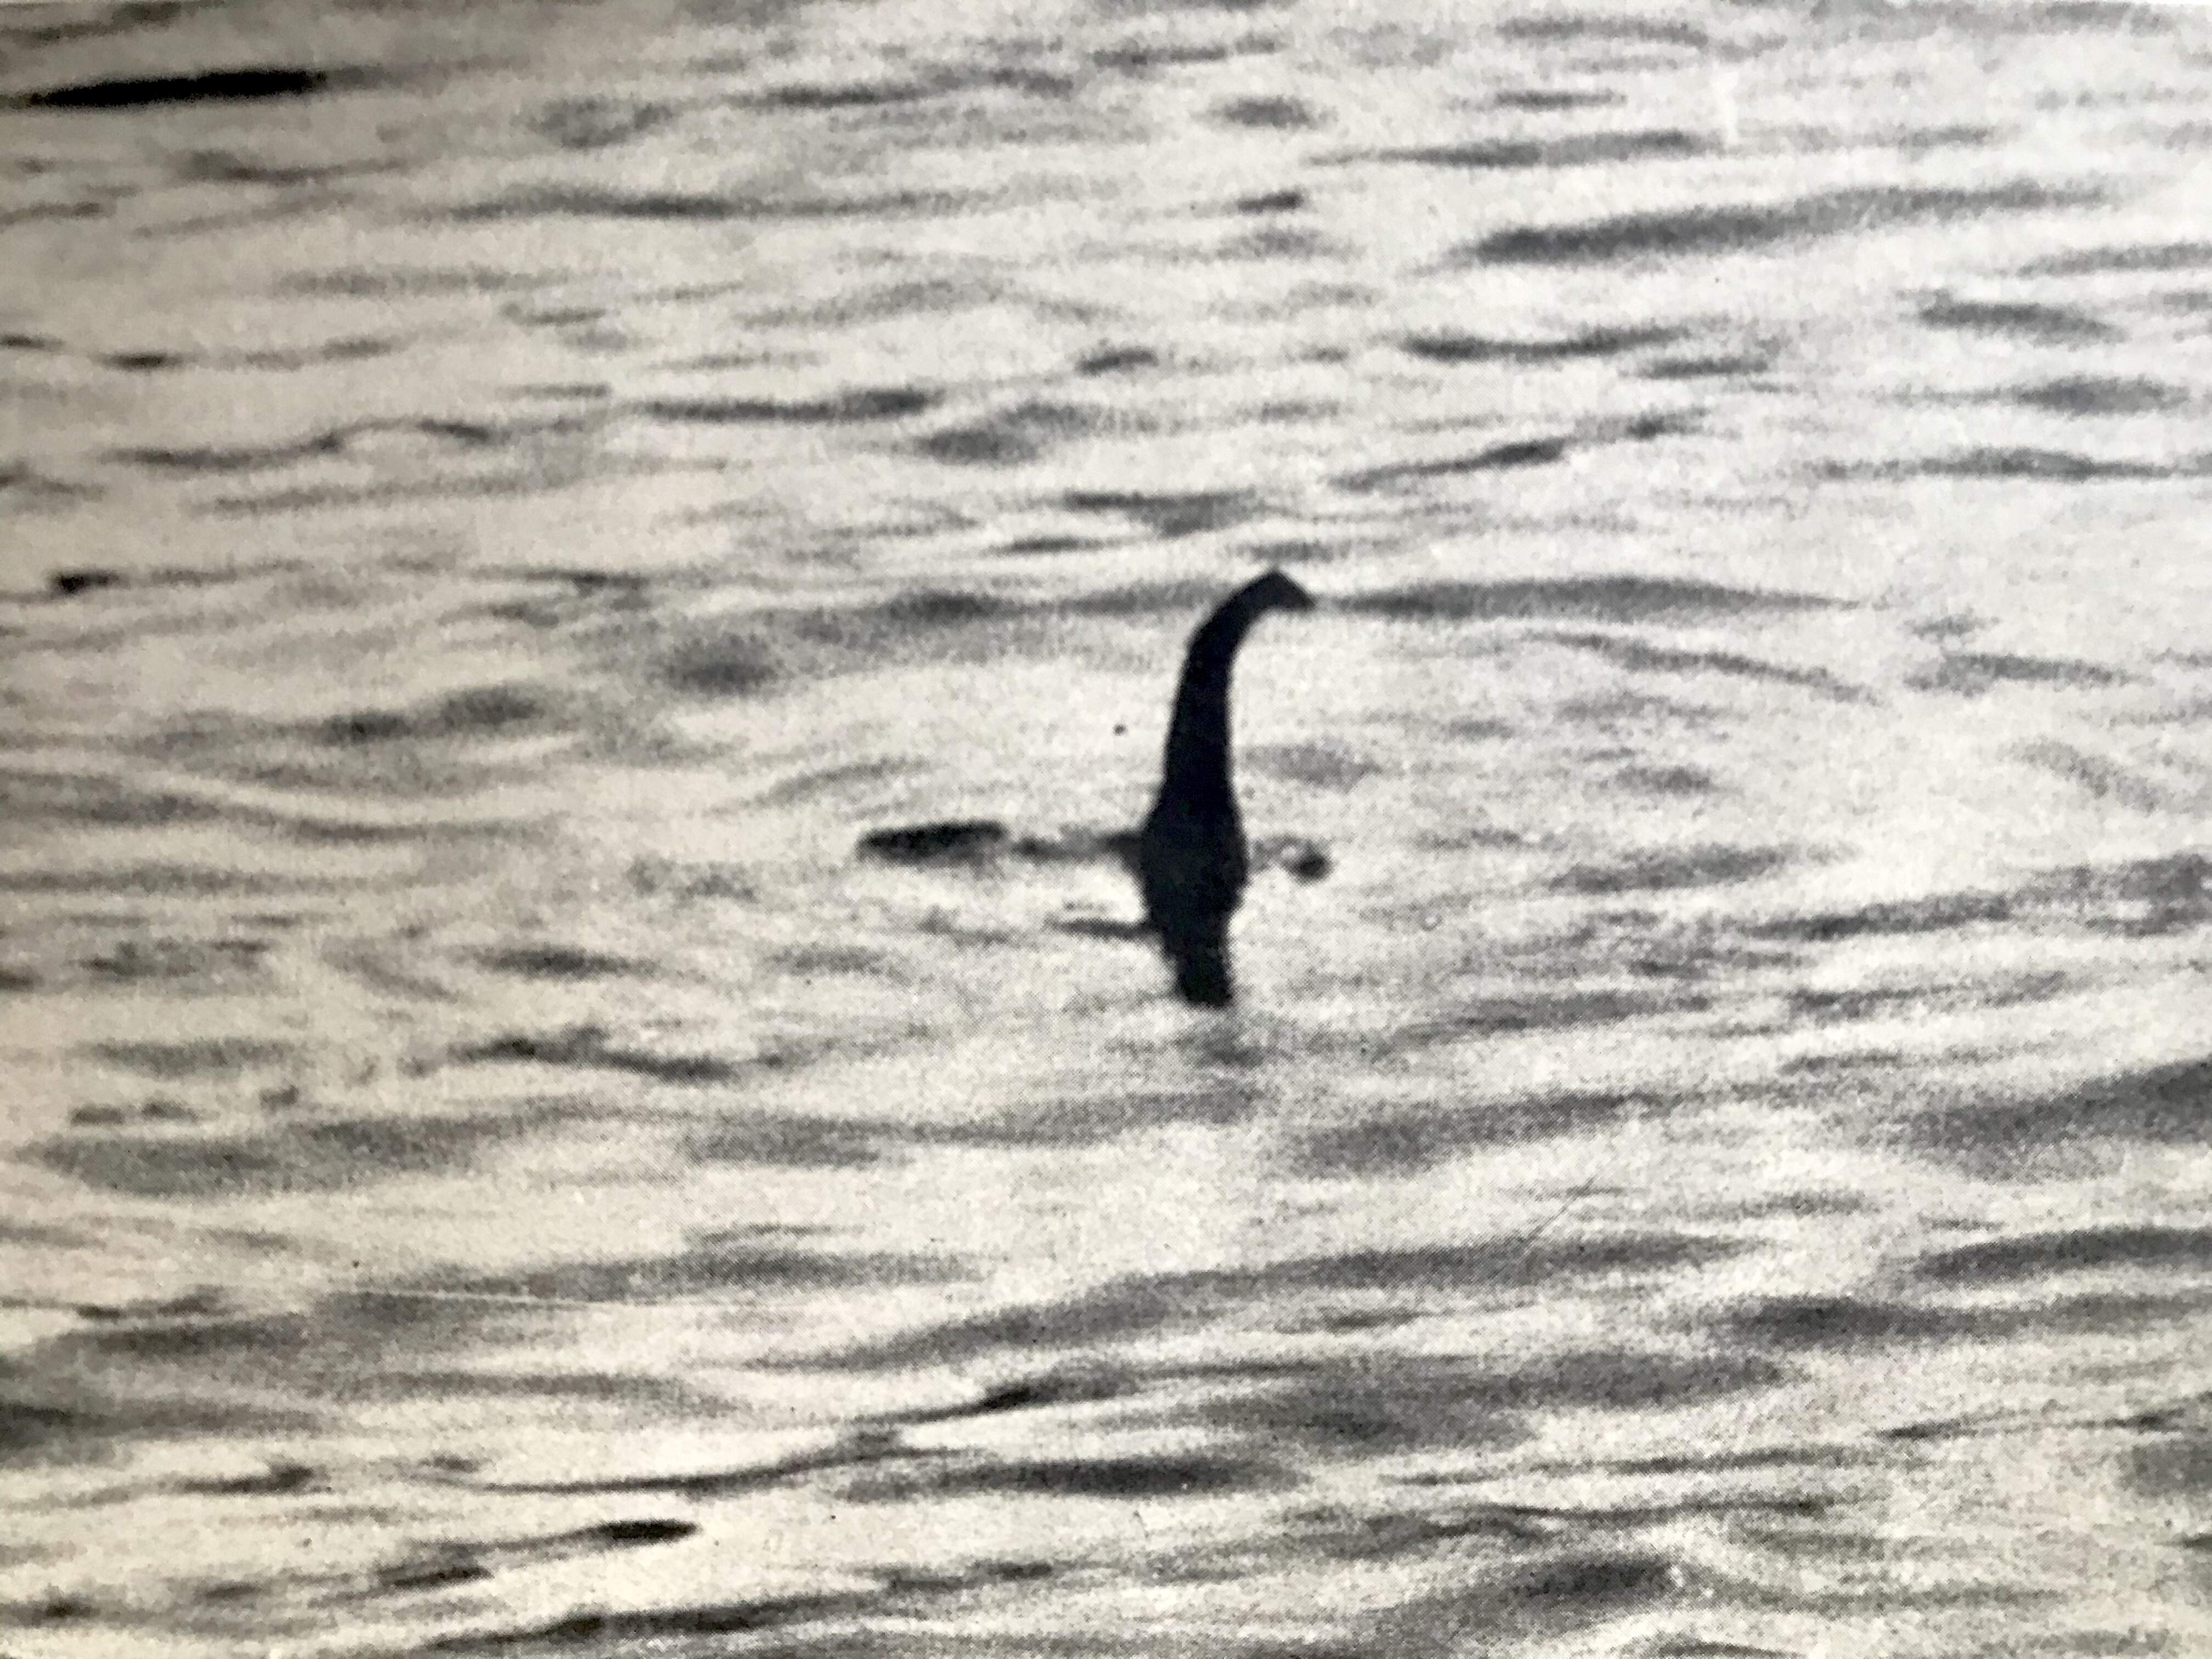 The Loch Ness Monster and Others by R. T. Gould